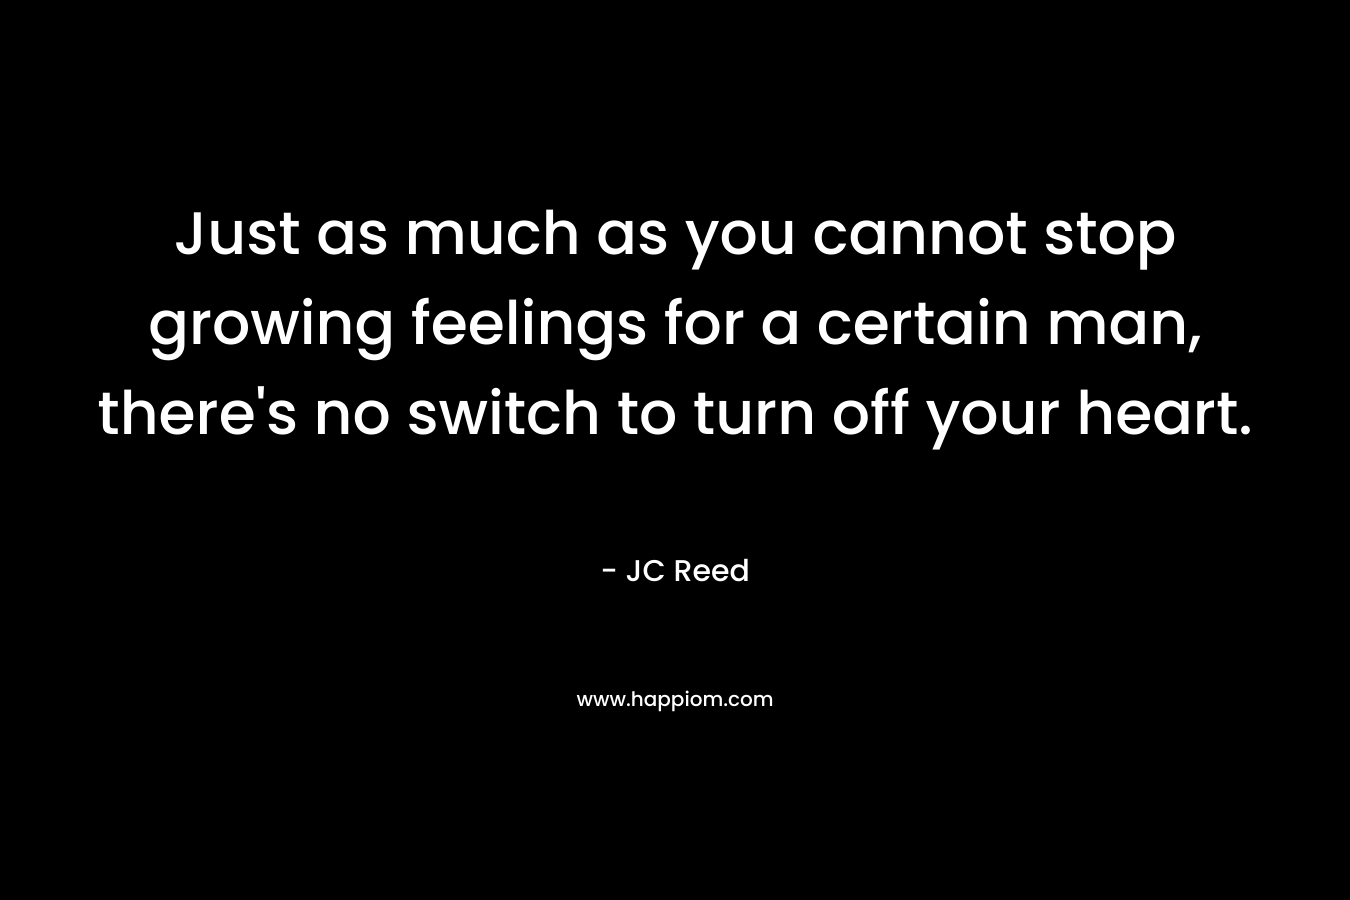 Just as much as you cannot stop growing feelings for a certain man, there’s no switch to turn off your heart. – JC Reed